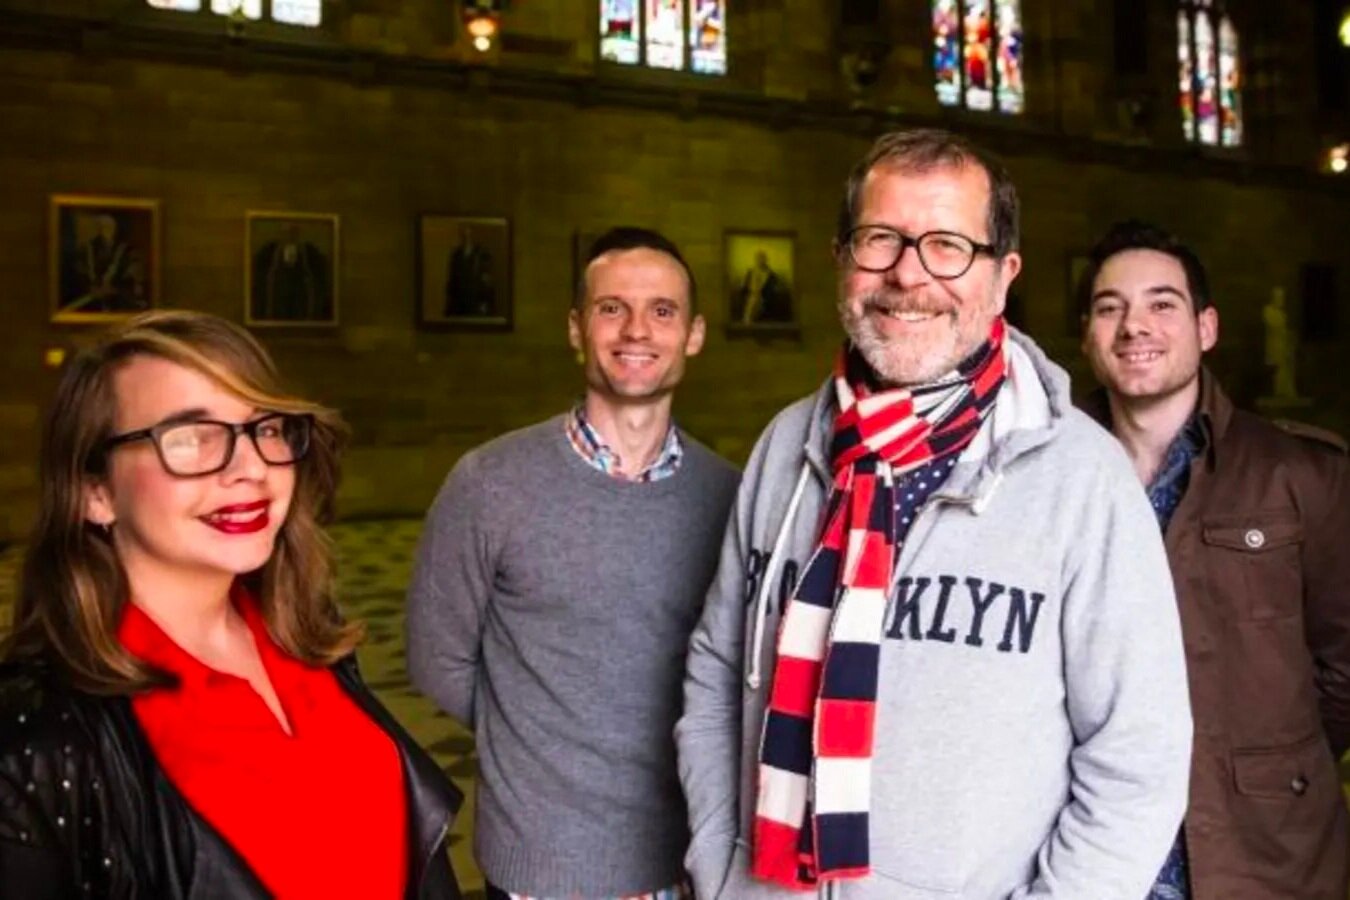 "Sydney University Dramatic Society marks 125 years by going back to its roots"